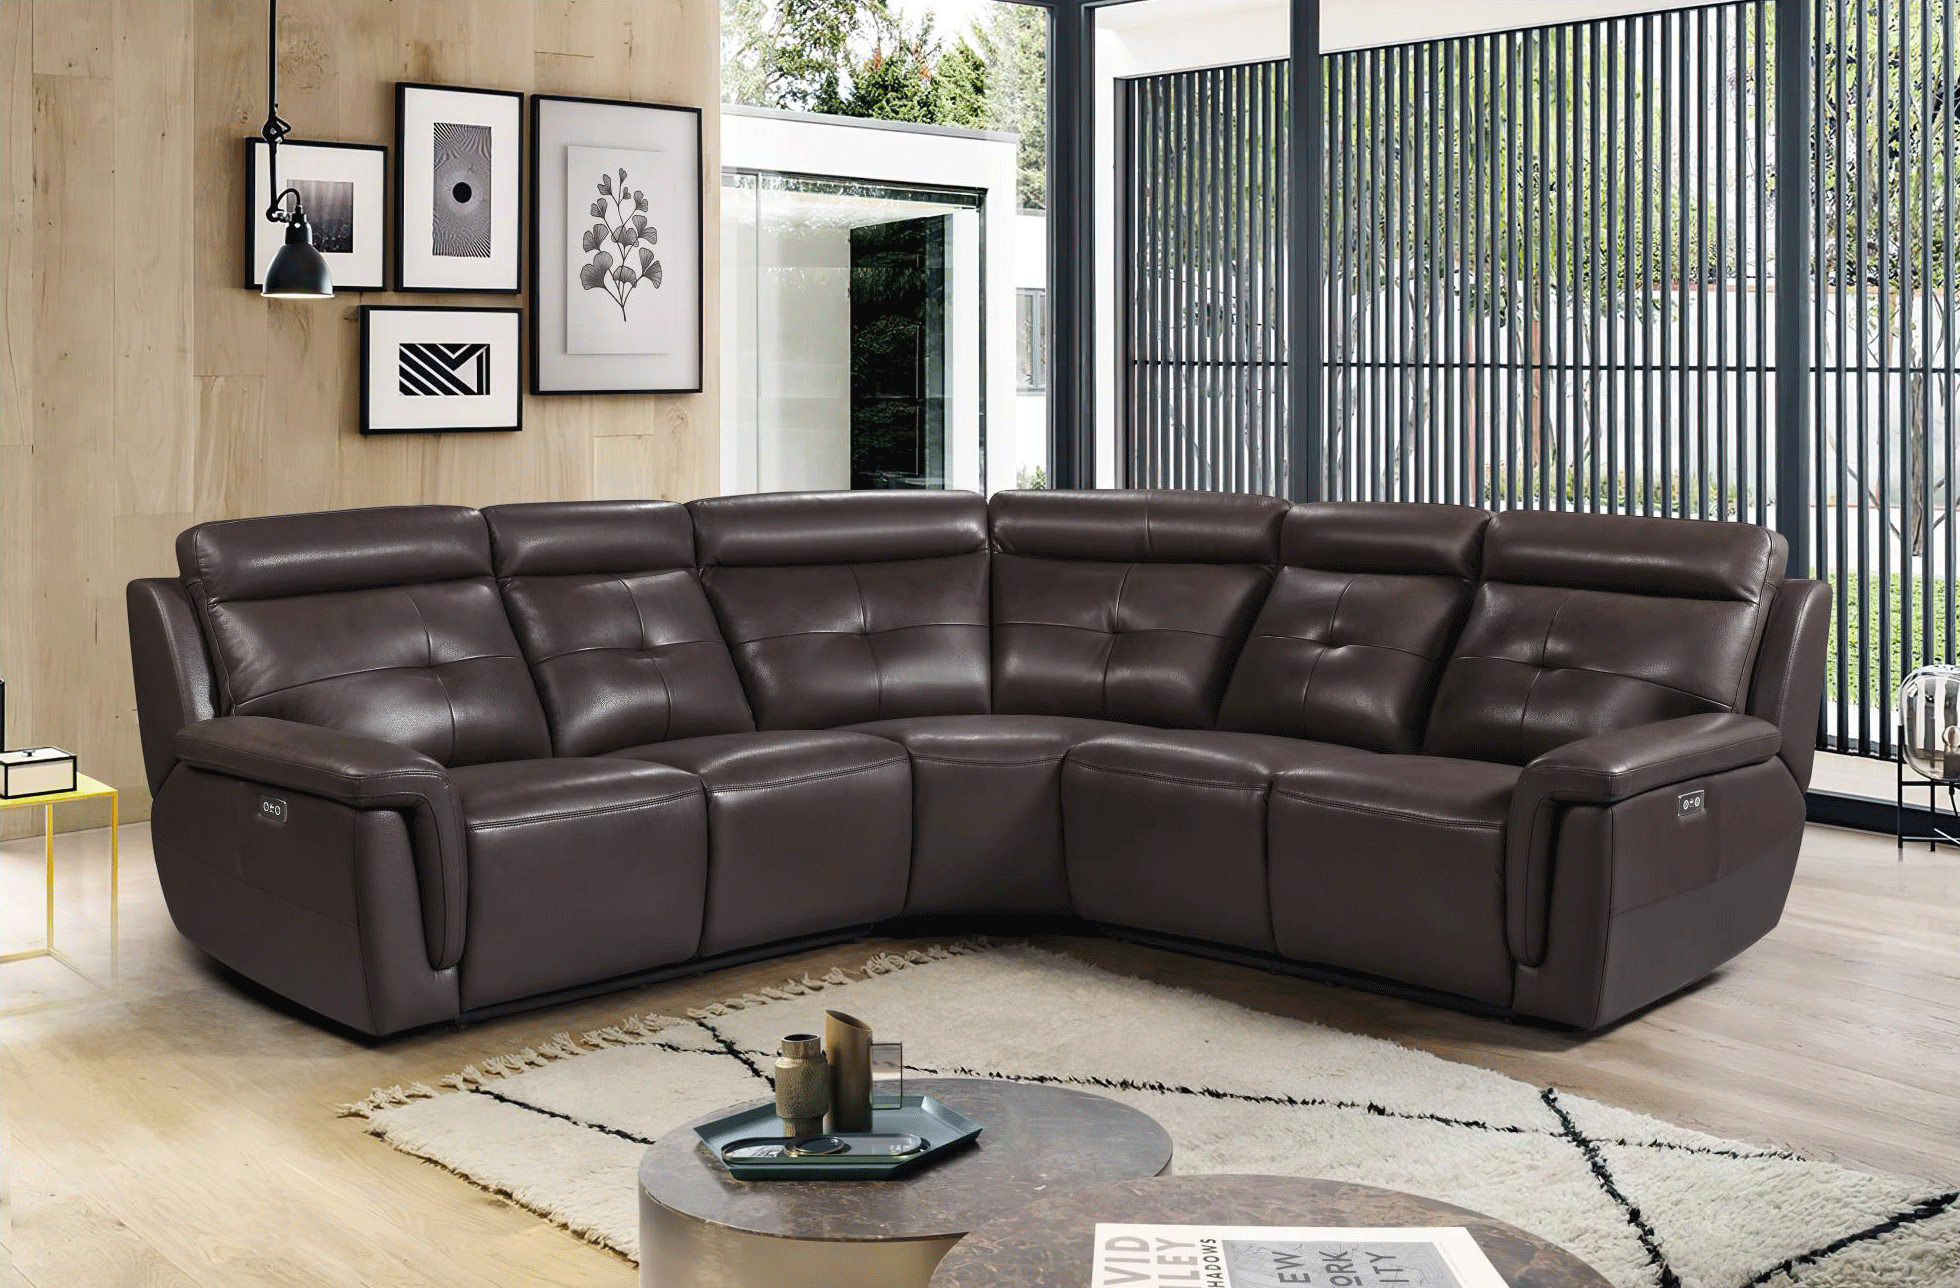 Living Room Furniture Sofas Loveseats and Chairs 2937 Sectional w/ electric recliners